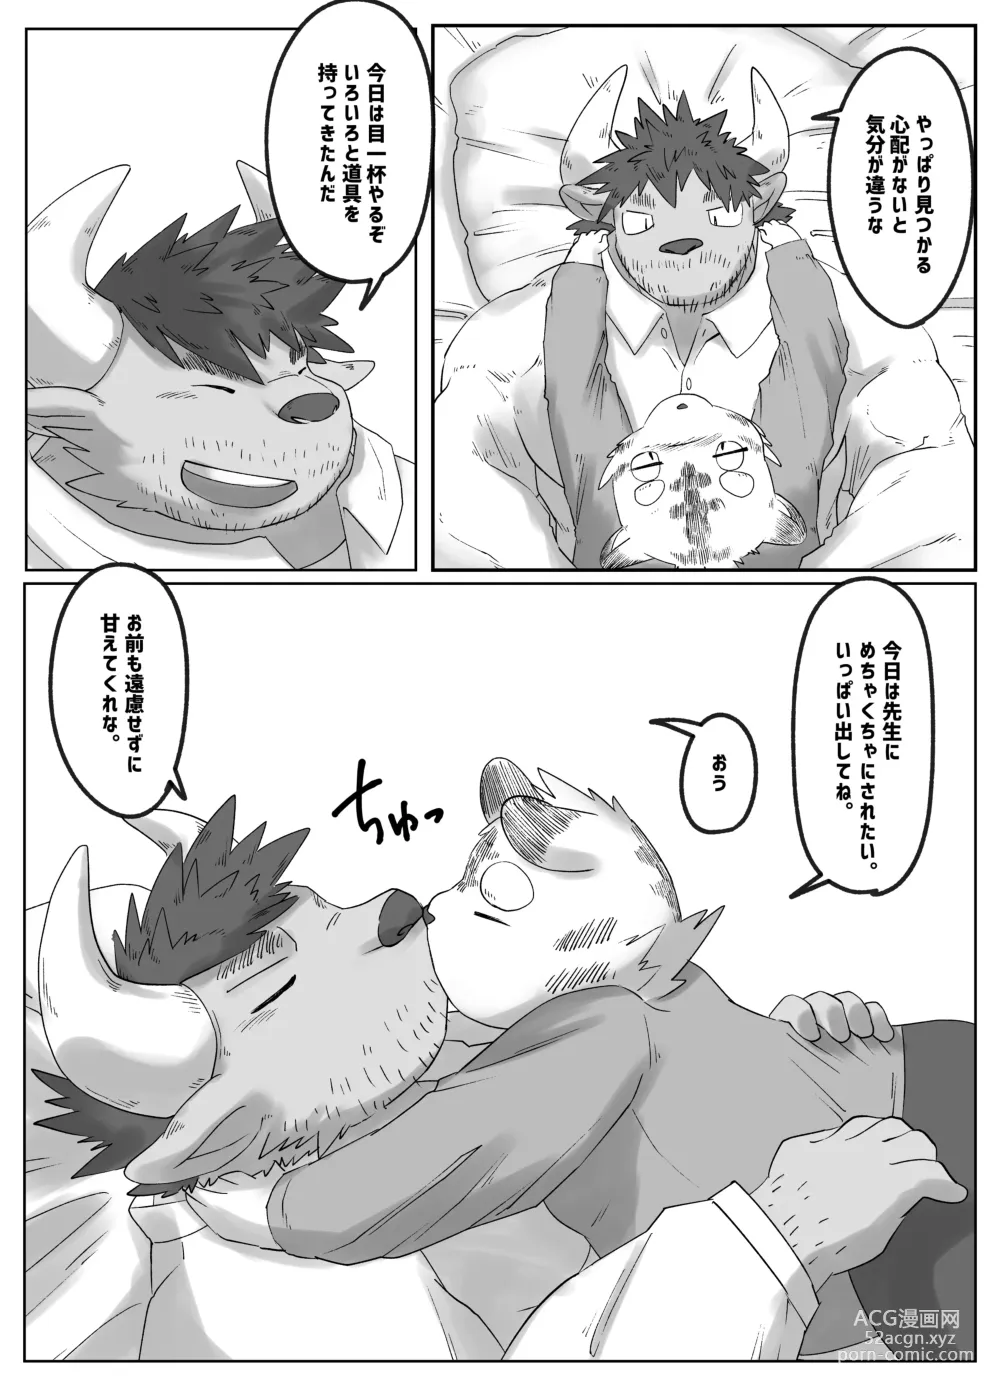 Page 7 of doujinshi Muscular Bull Teacher & Chubby Tiger Student 4